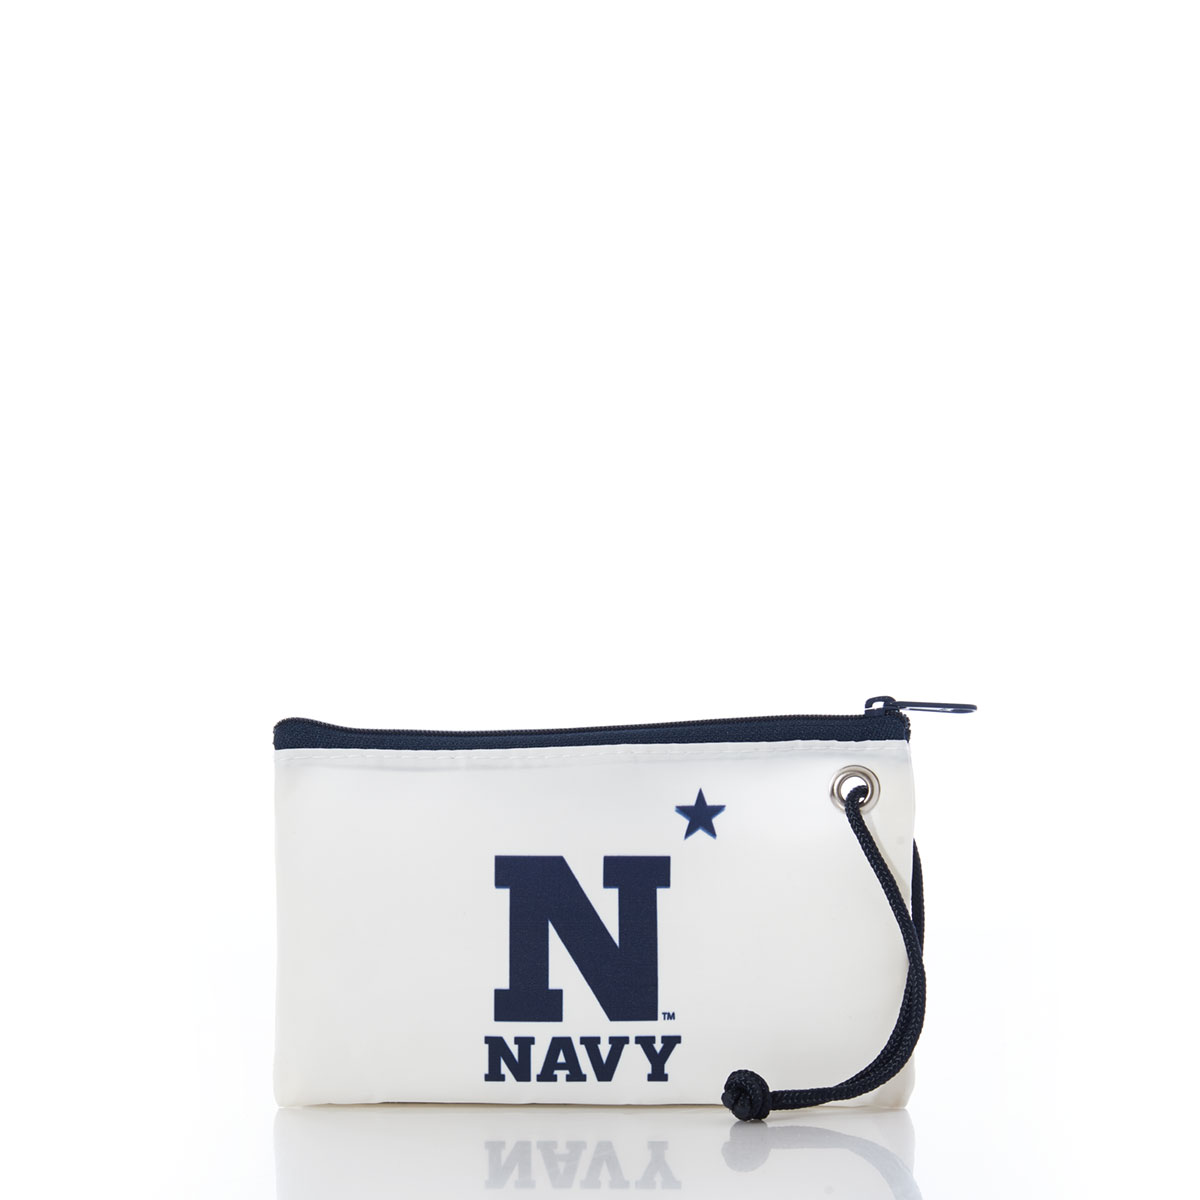 a white recycled sail cloth wristlet with navy zipper is printed with the Naval Academy logo in navy